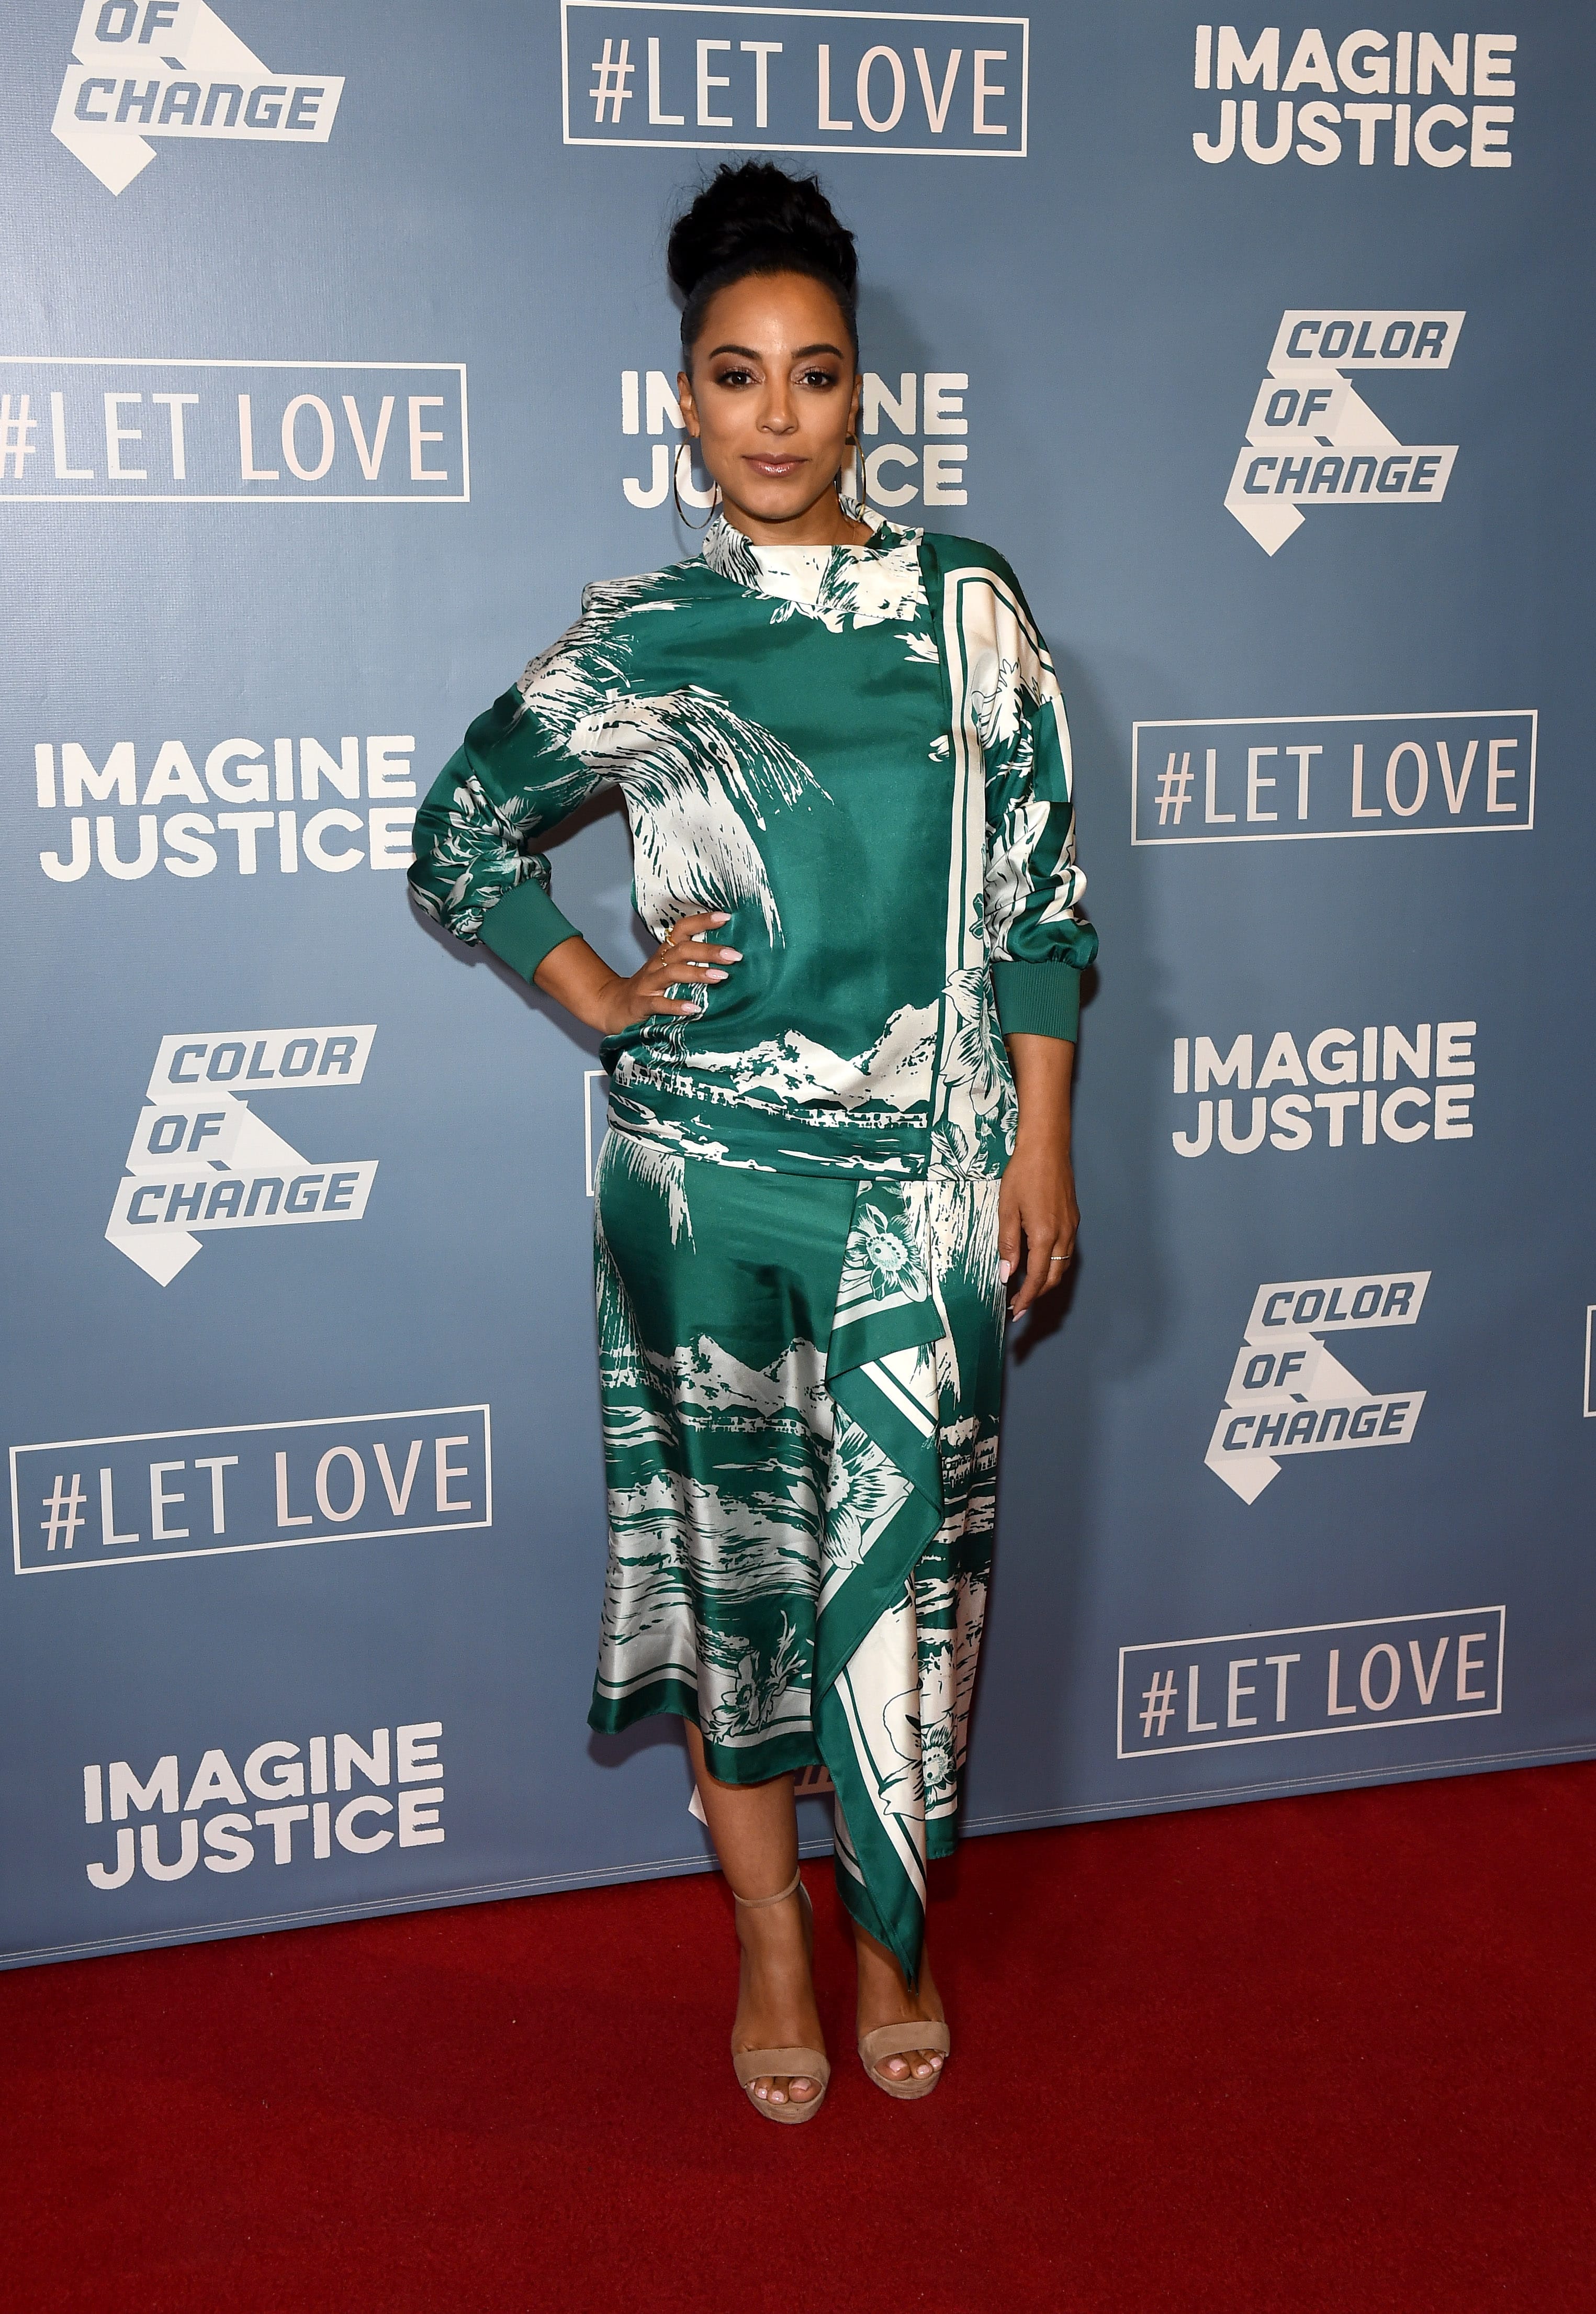 Amanda Seales, Laila Ali, Will Smith, And More Celebs Out And About